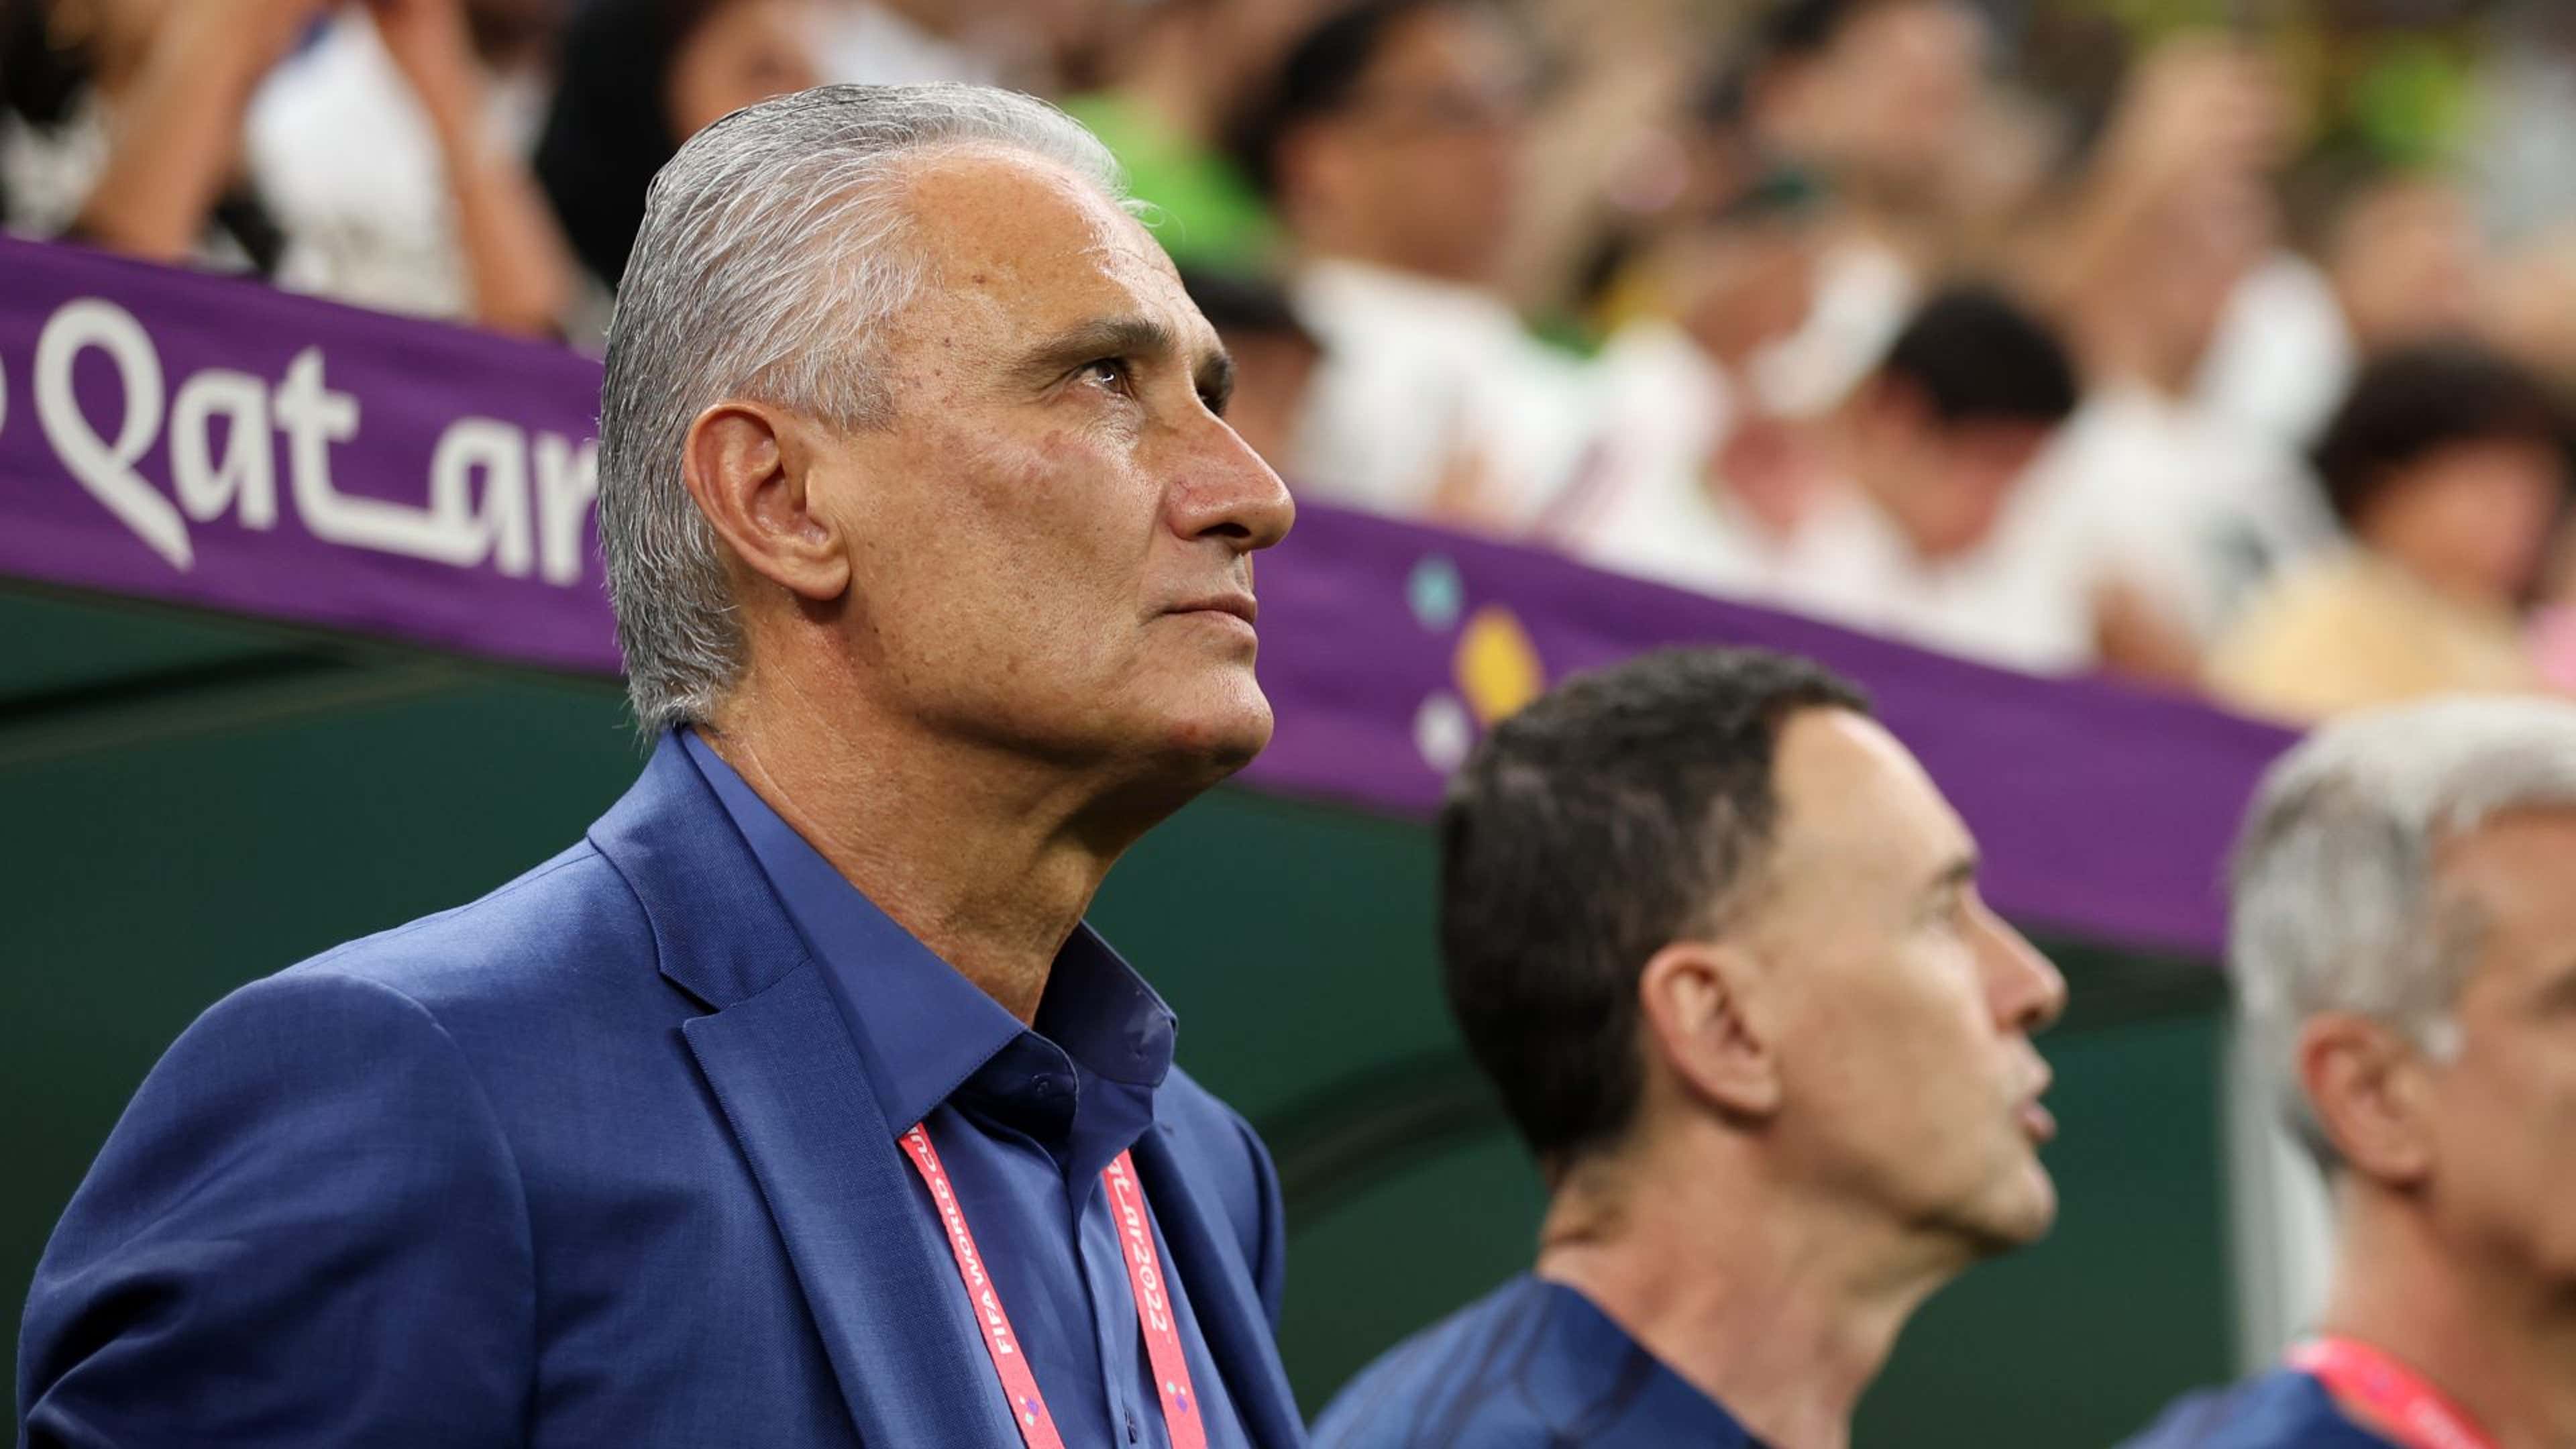 Tite confirms he will leave as Brazil coach following shock World